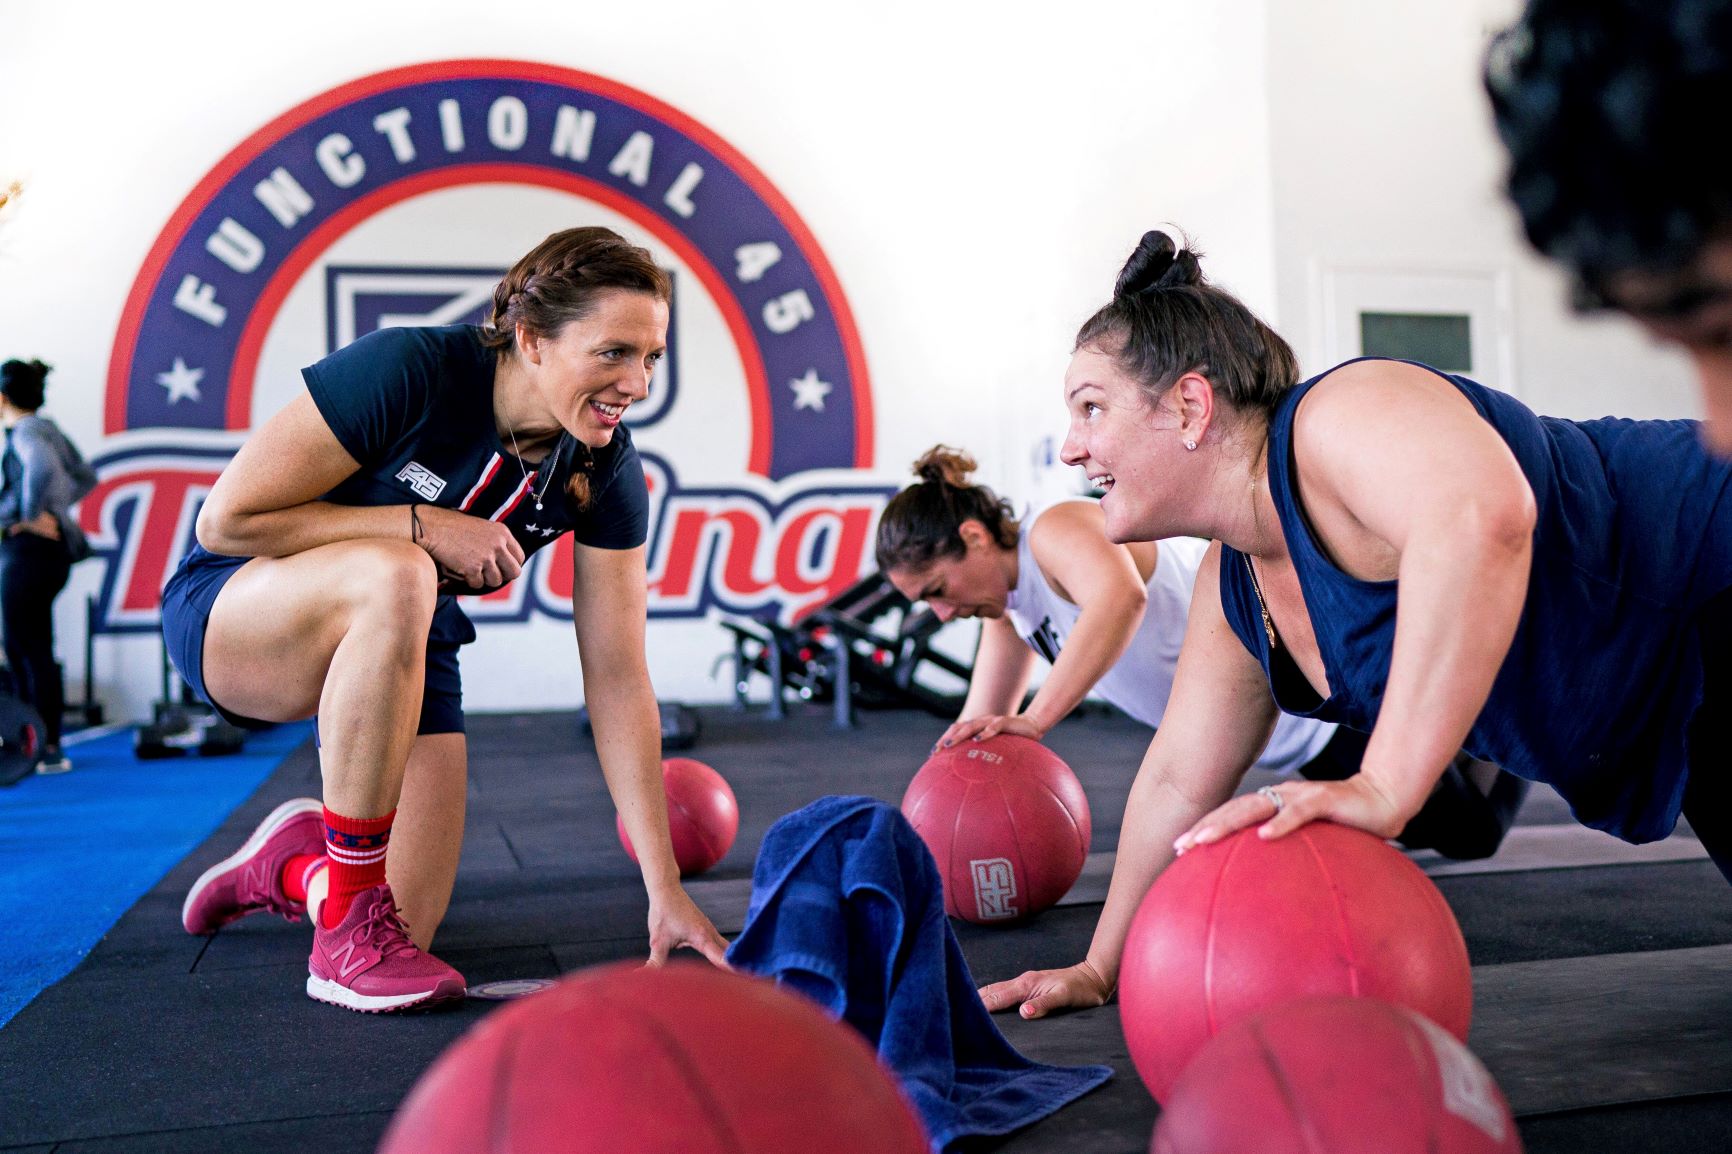 15 Minute F45 workout gear for at Gym